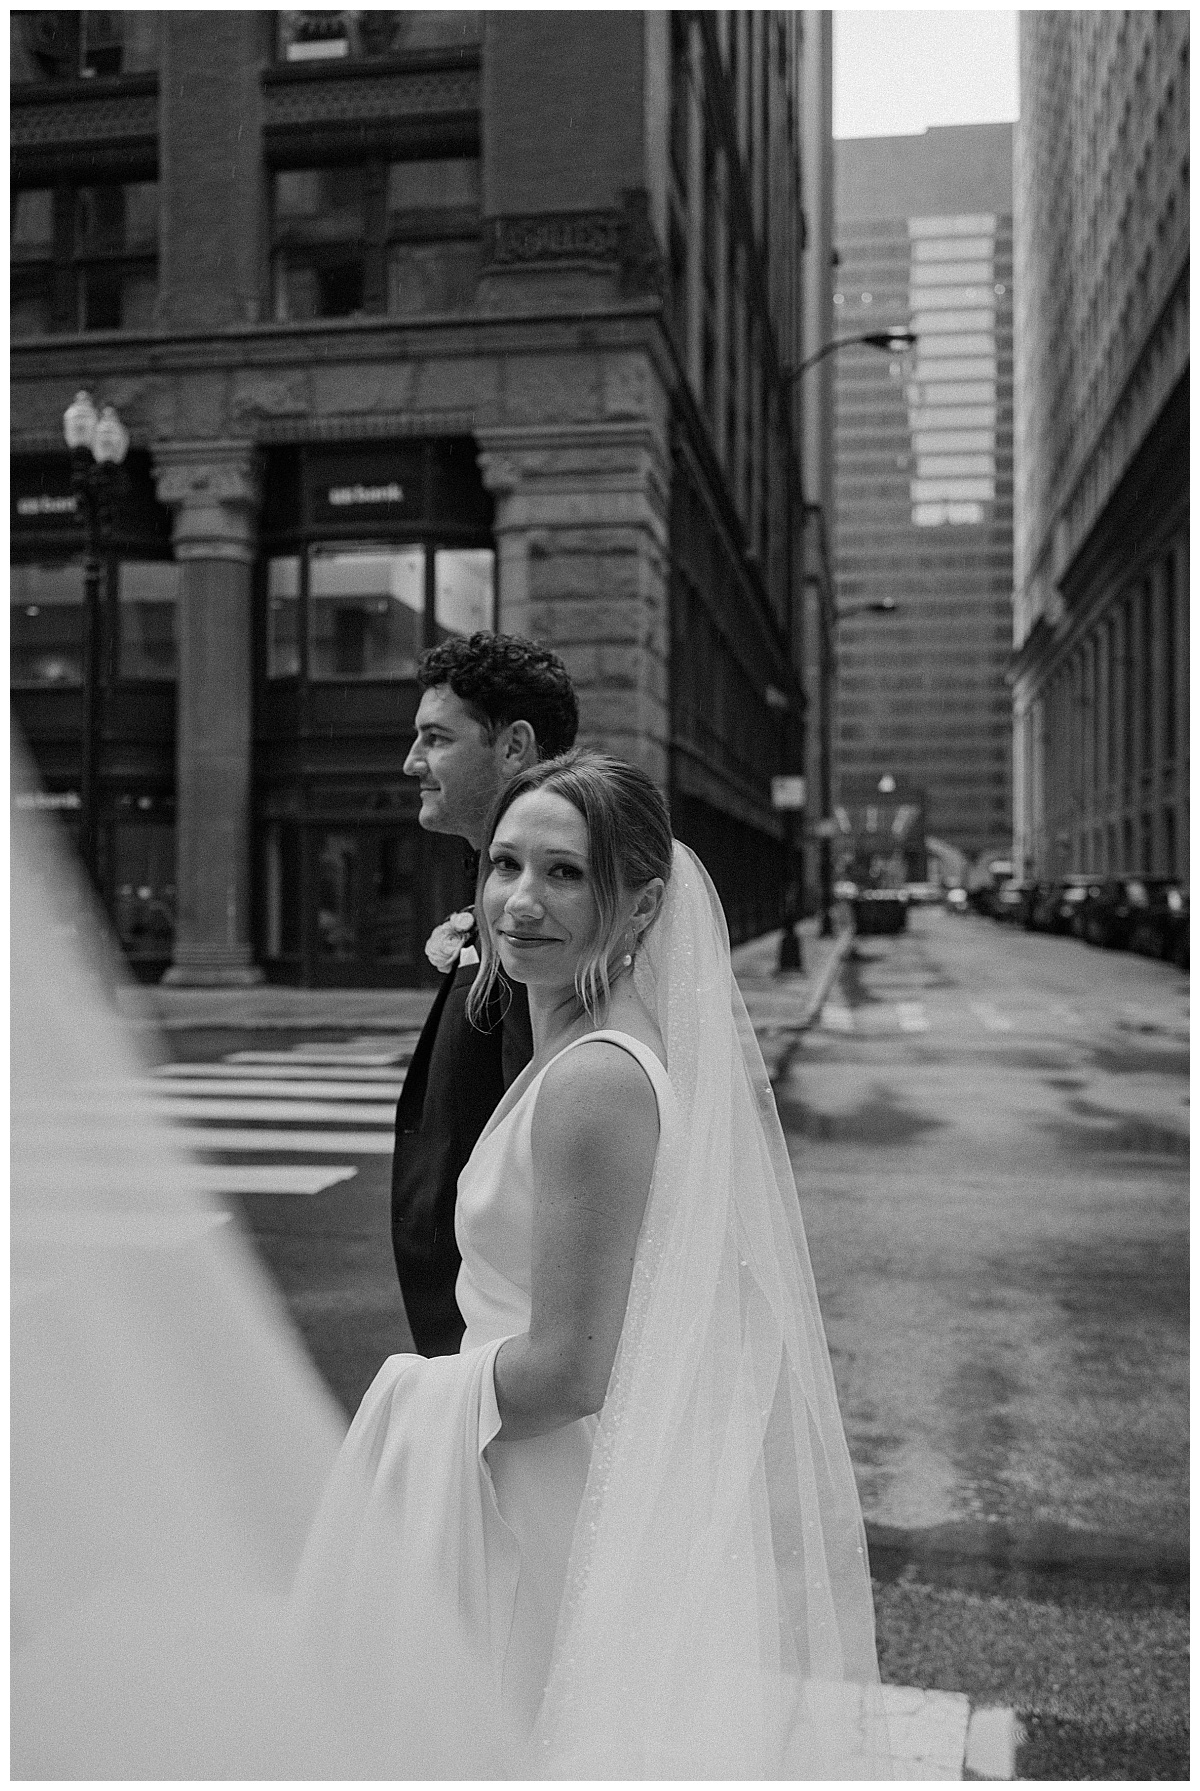 wife looks to side while she walks with new husband by Midwest wedding photographer